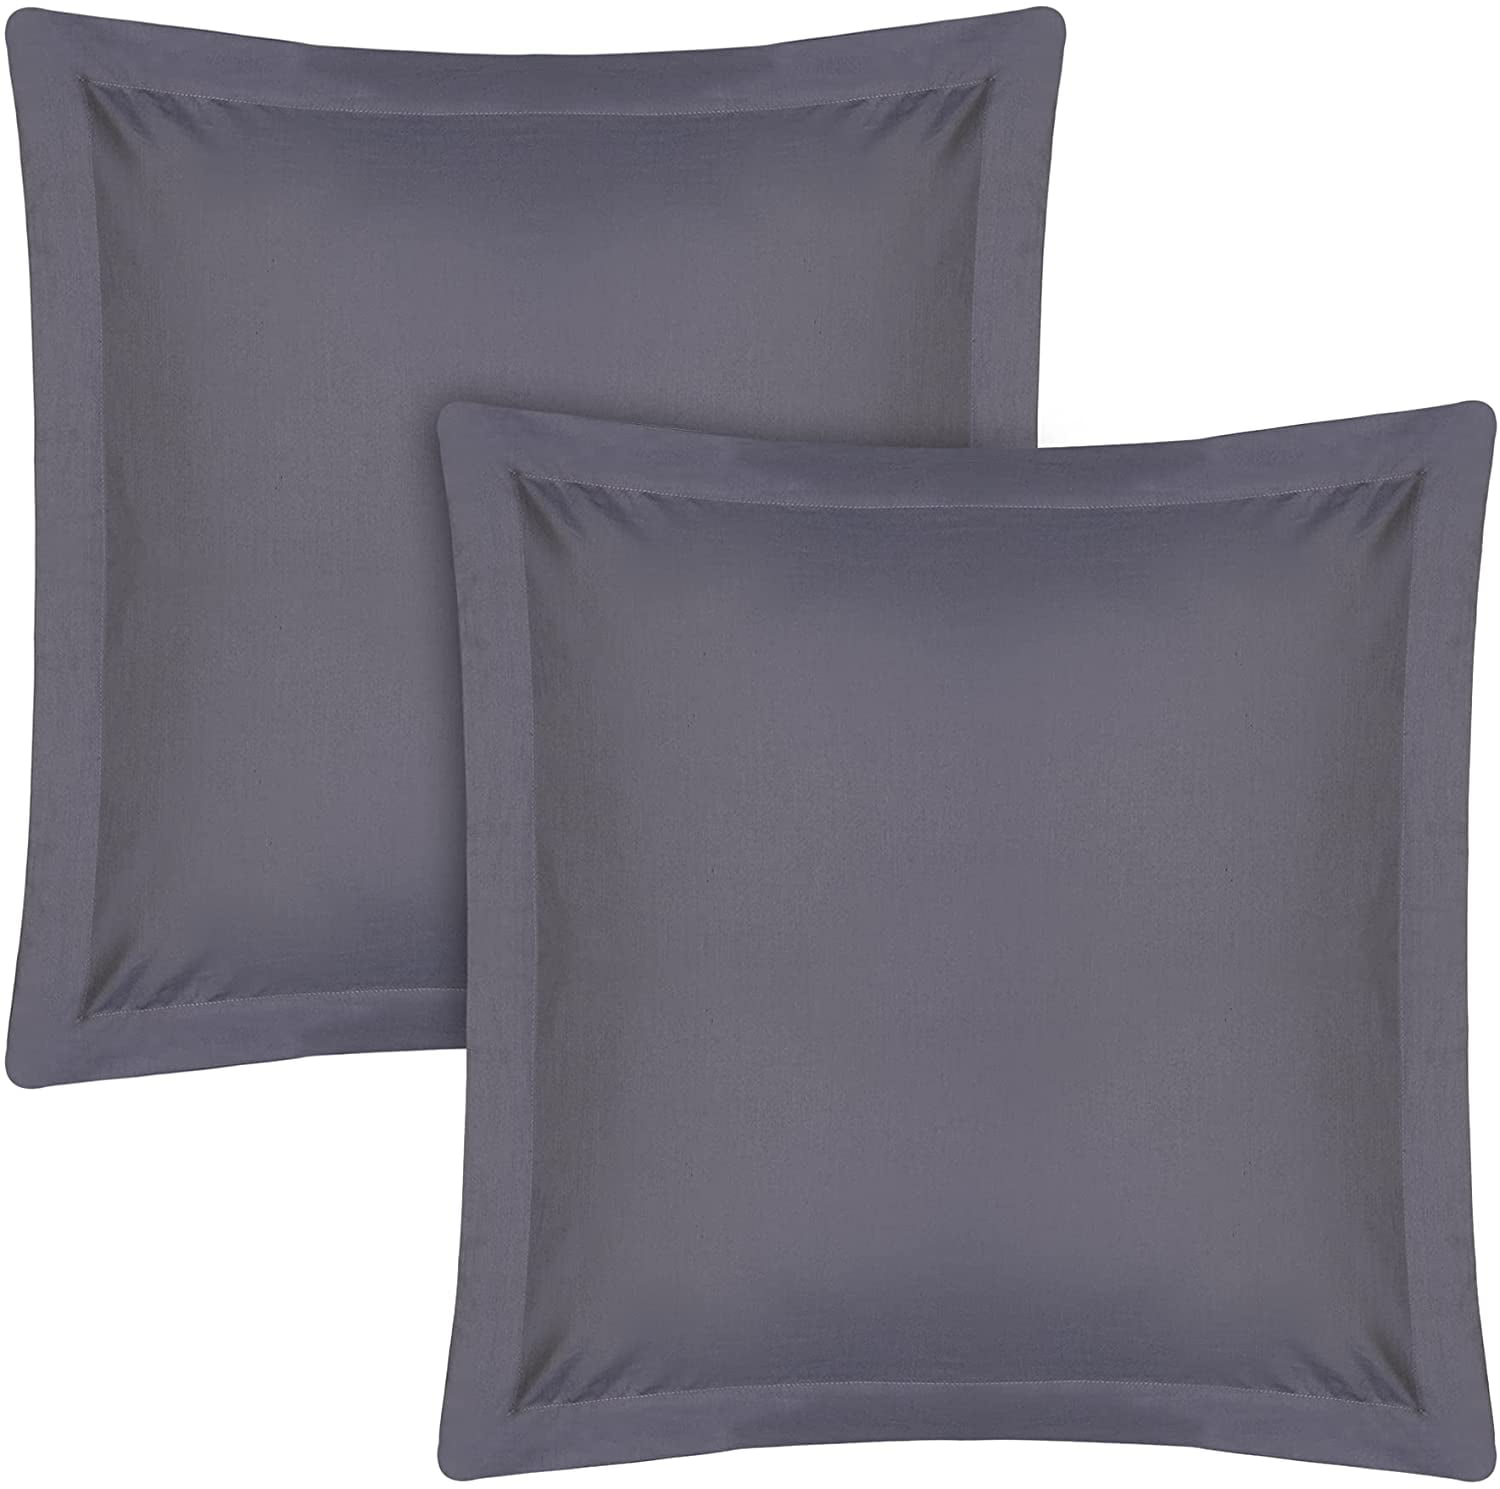 Pinch Plated European Euro Pillow Shams Set of 2PC Toupe SOLID 500TC 100% COTTON 